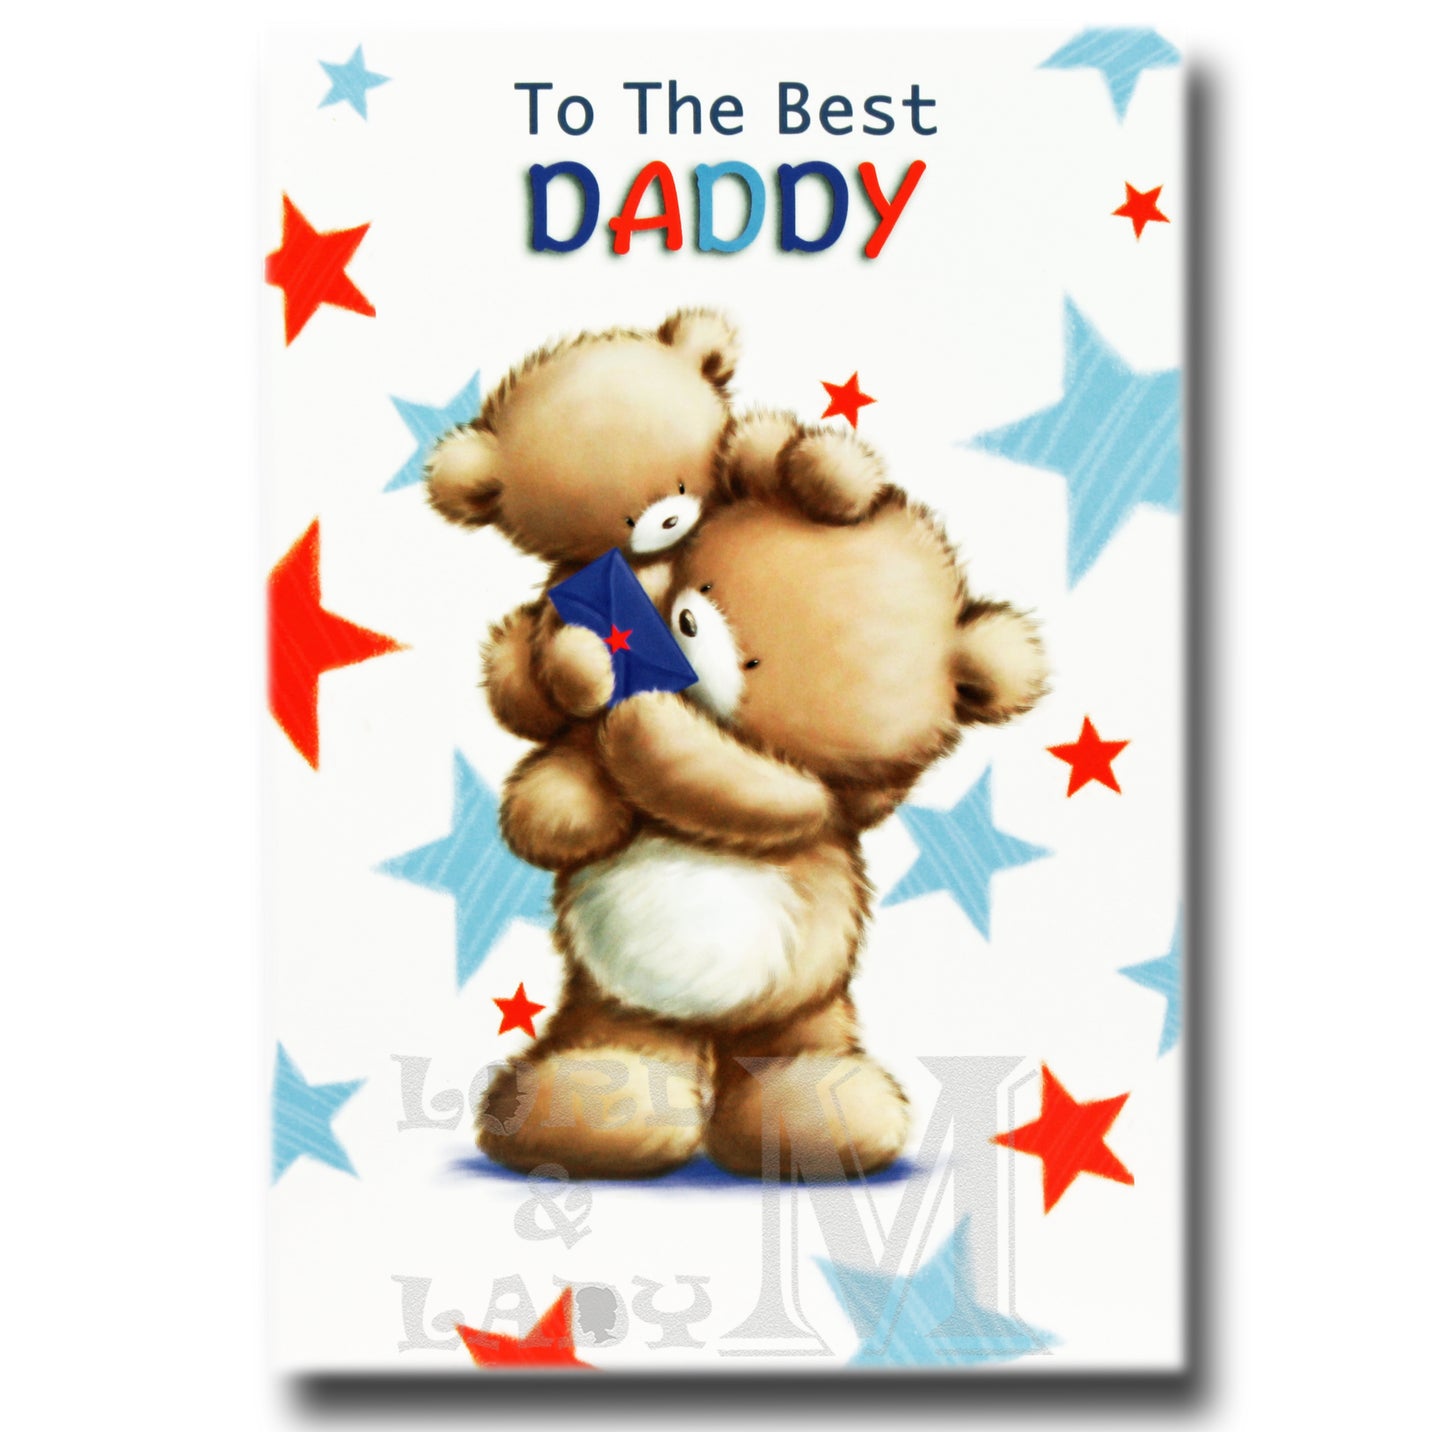 20cm - To The Best Daddy - Red Blue Stars - JK